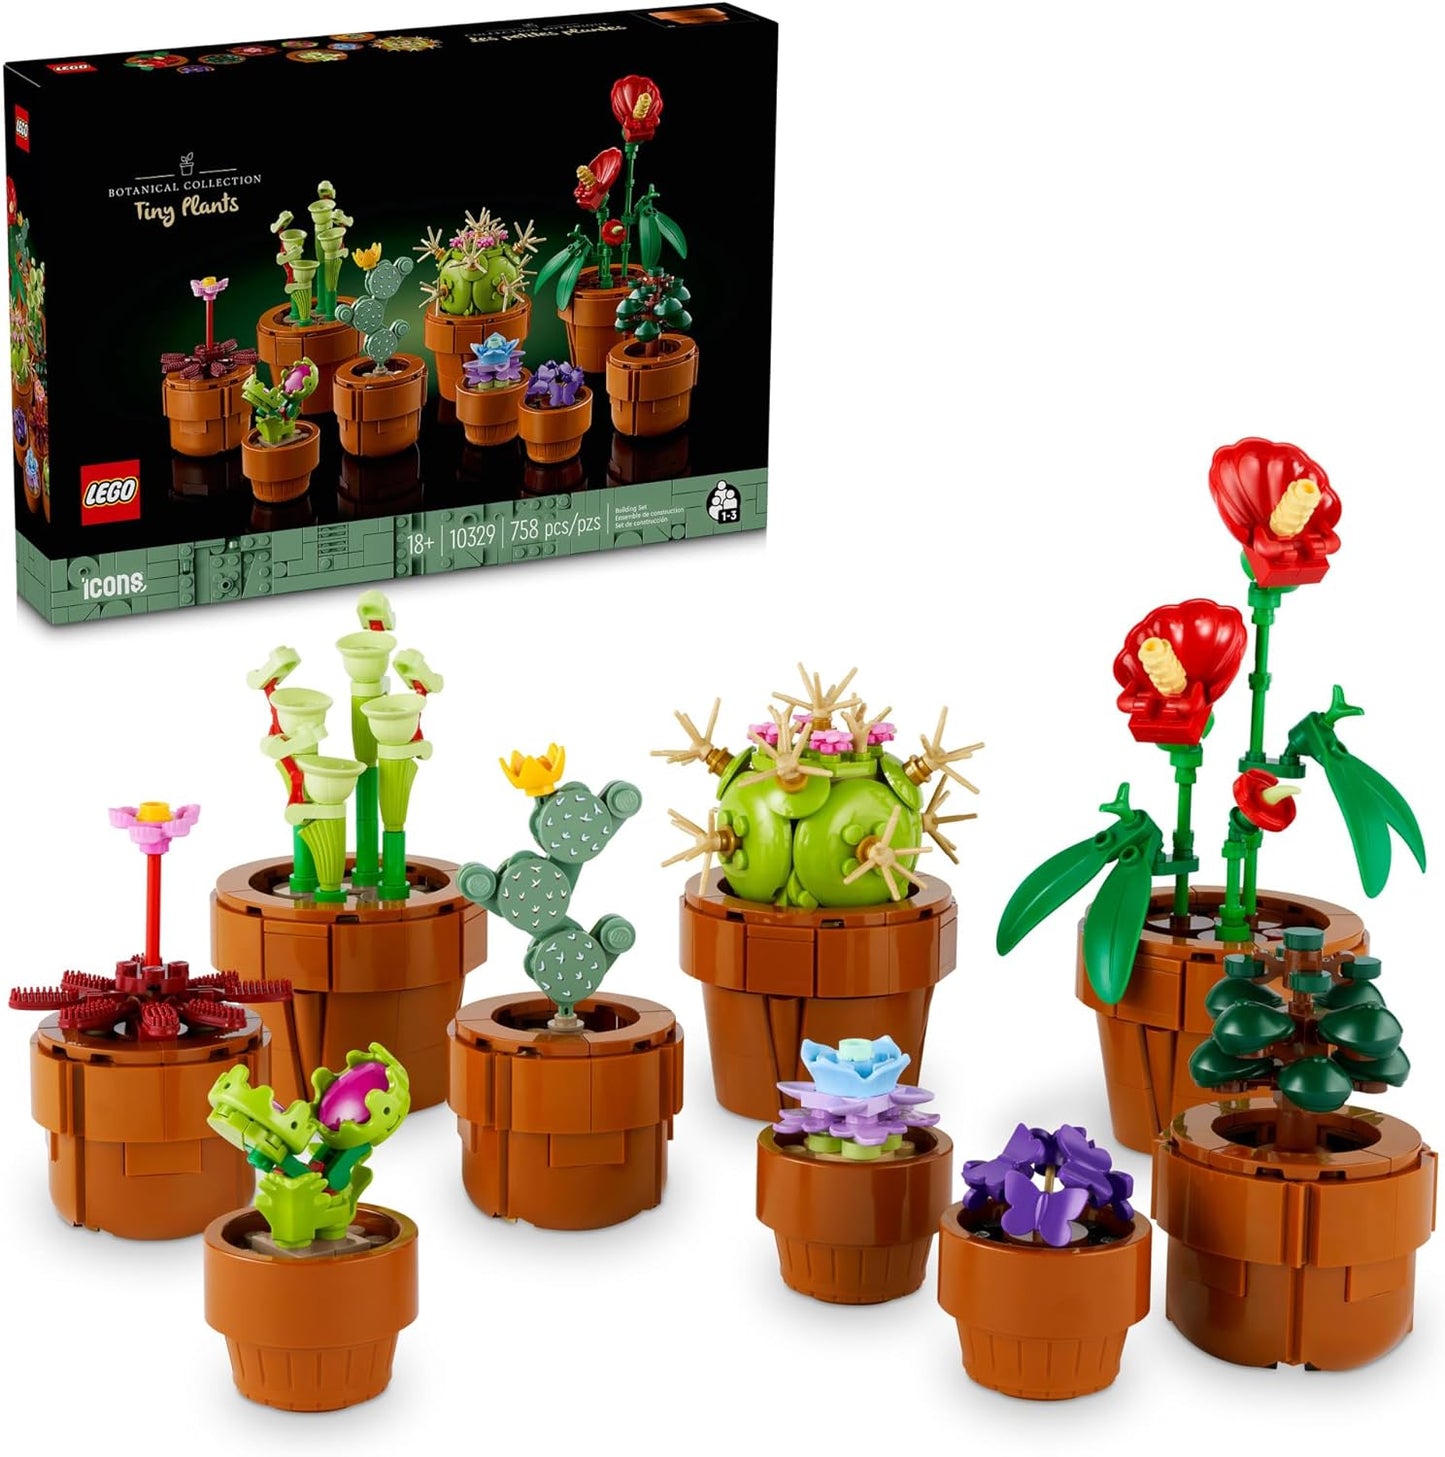 LEGO Icons Tiny Plants Building Set, Cactus Décor Gift Idea for Flower-Lovers, Carnivorous, Tropical and Arid Flora, Build and Display, Botanical Collection, Creative Building Sets for Adults, 10329